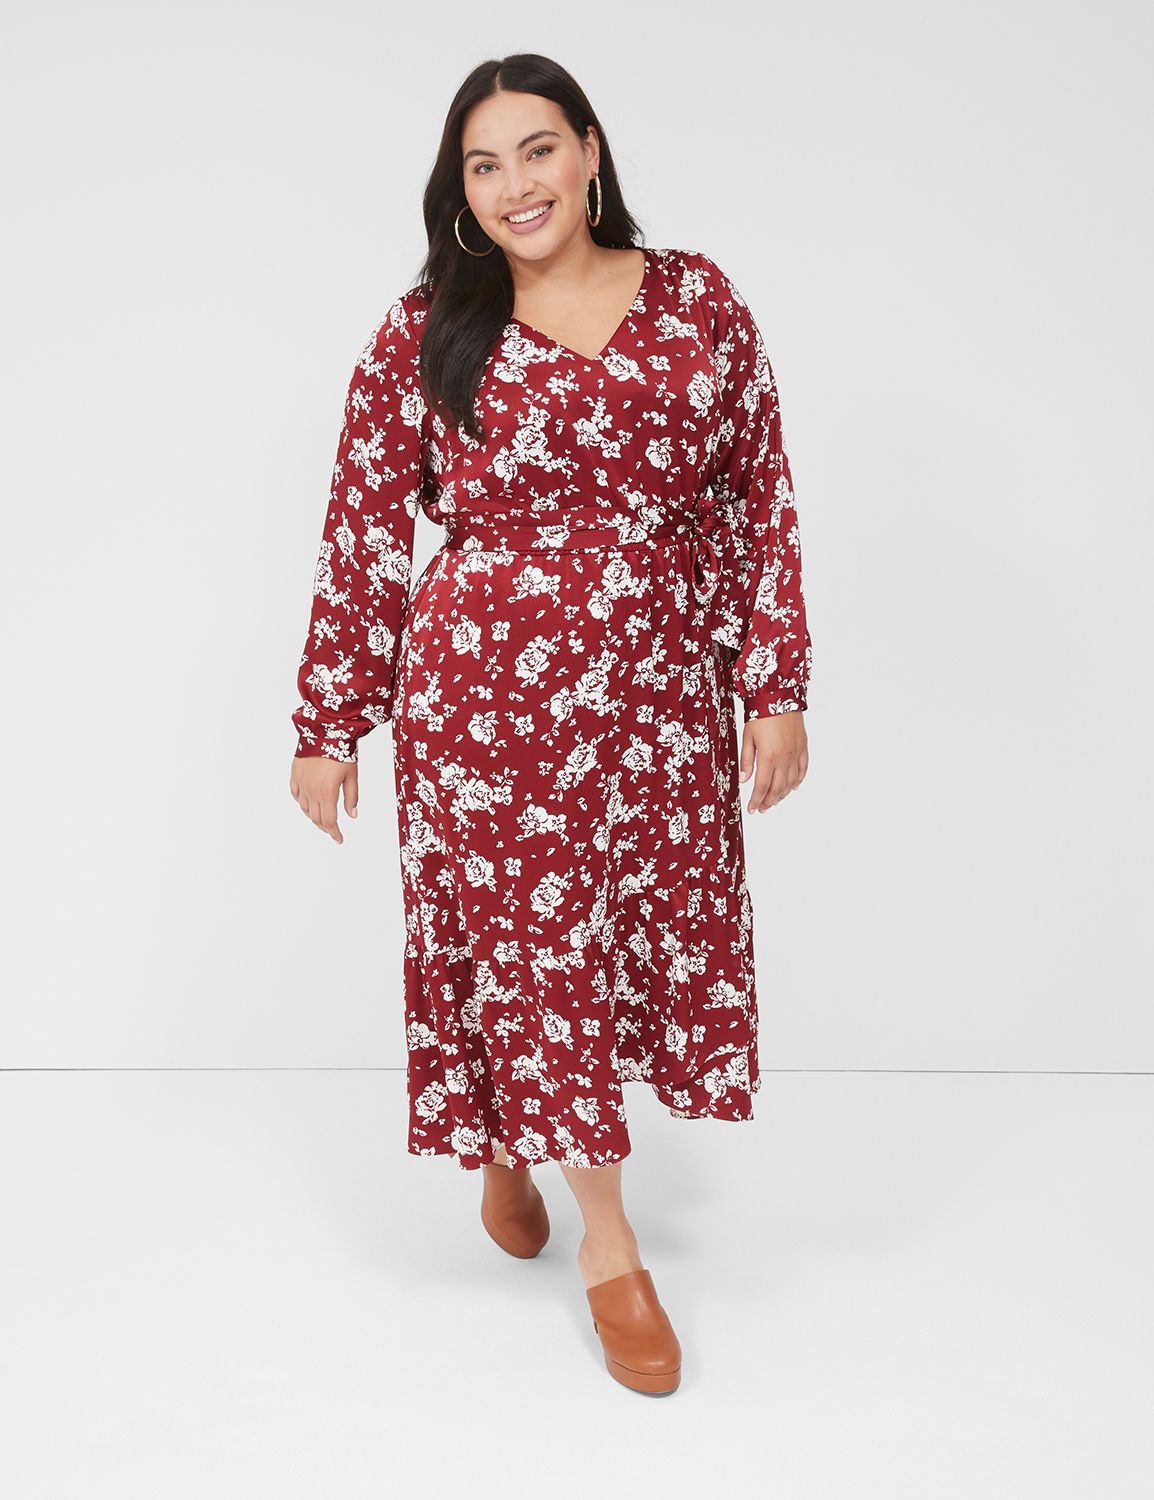 Plus Size Christmas Outfit FAVES at Lane Bryant ﻿ - Fro Plus Fashion